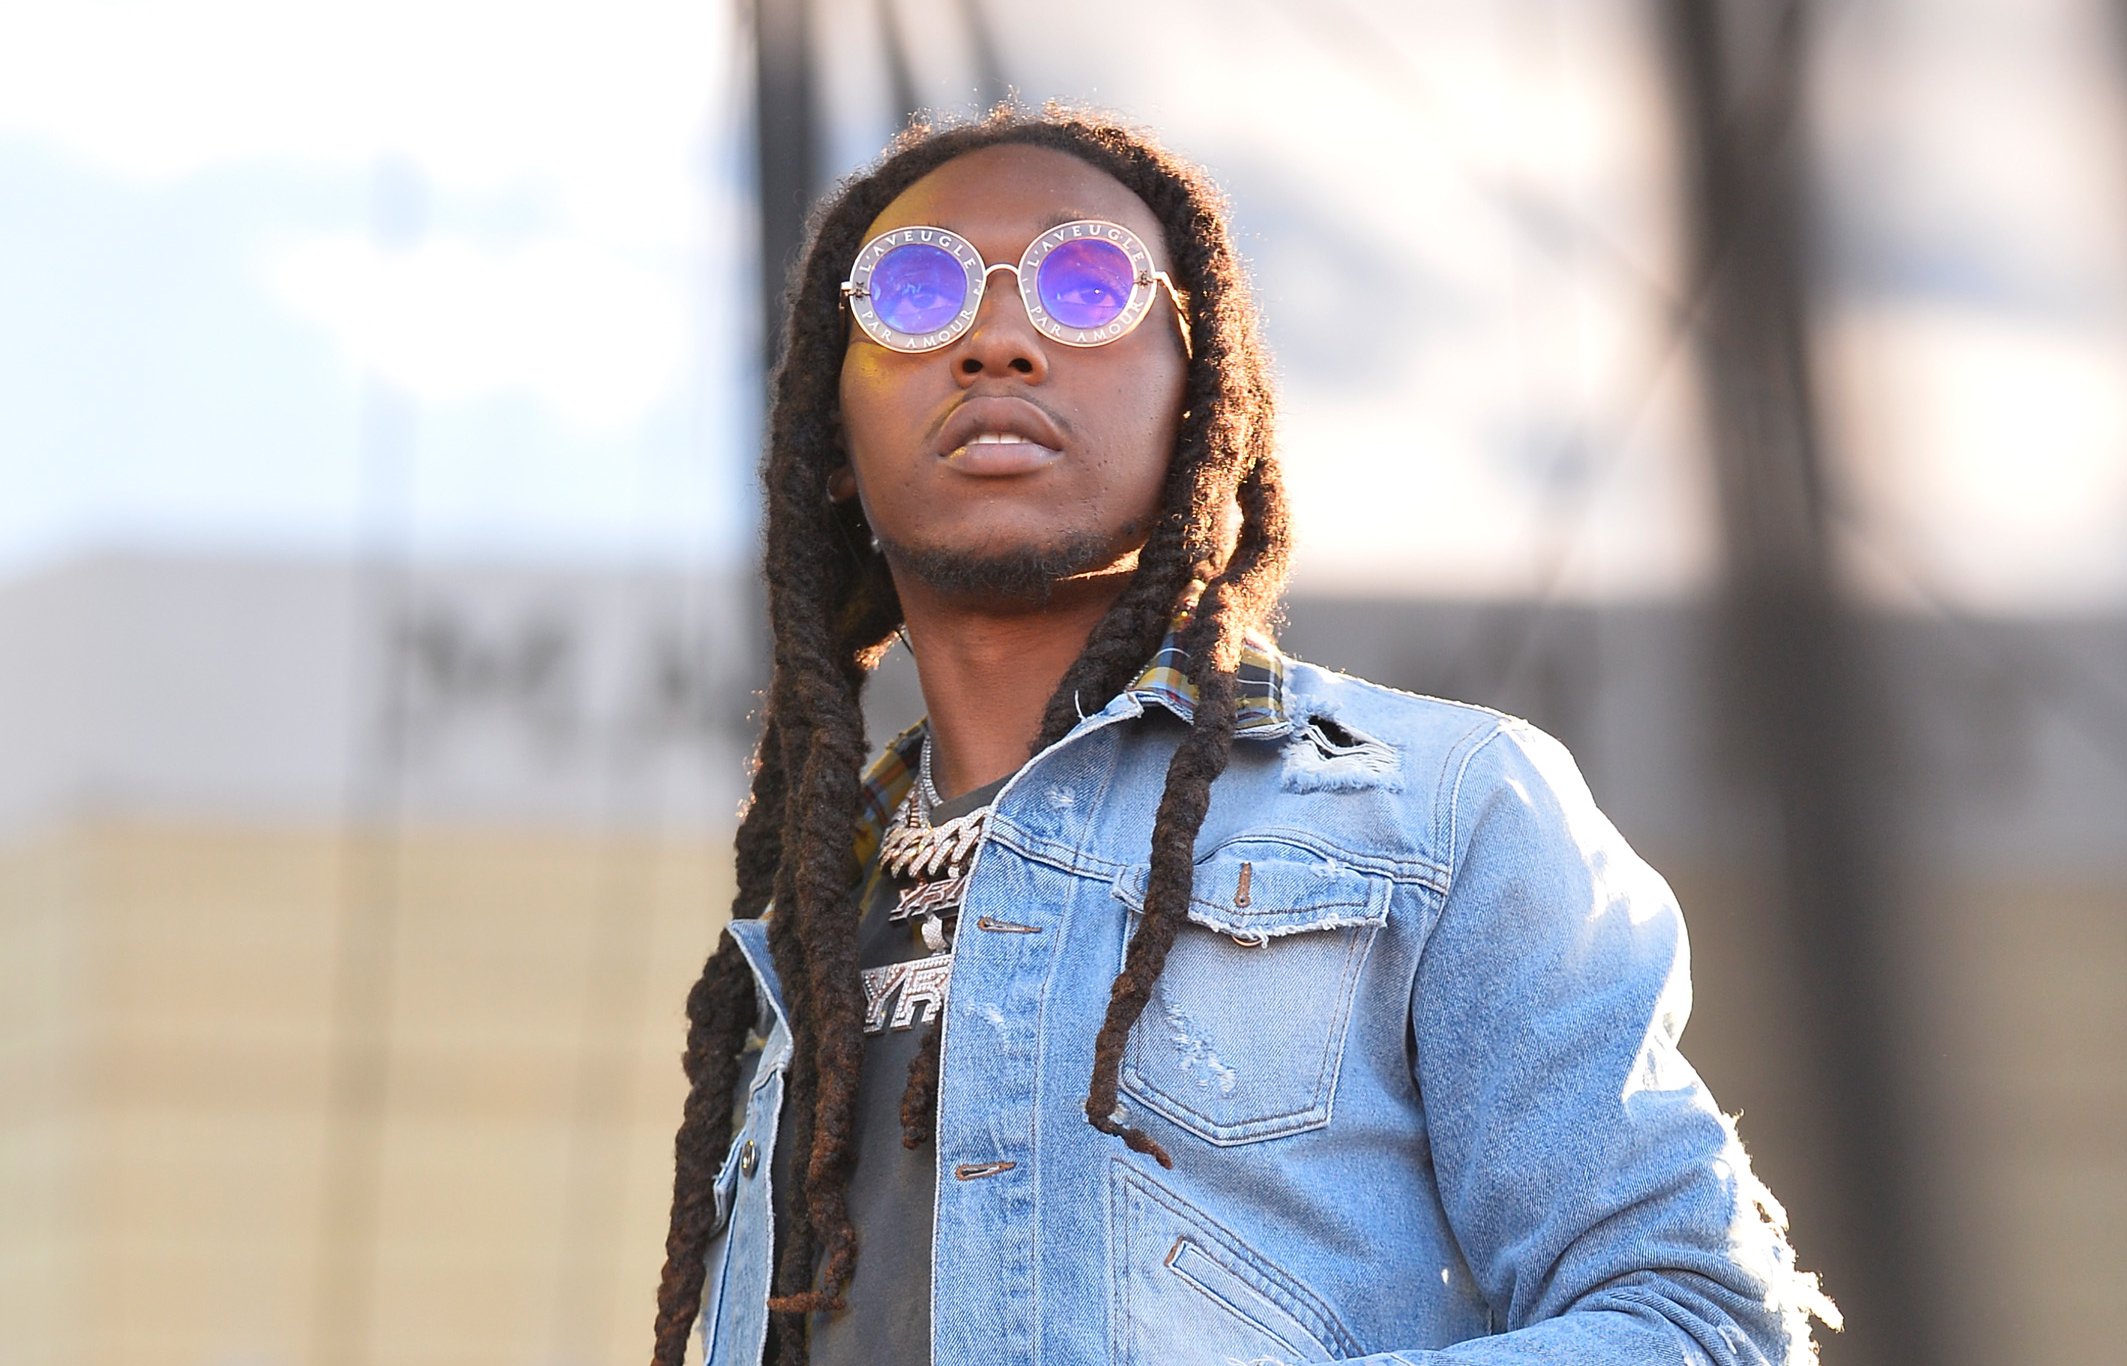 Migos rapper Takeoff, killed in a Nov. 1 shooting, performing on stage in a blue jacket and sunglasses.